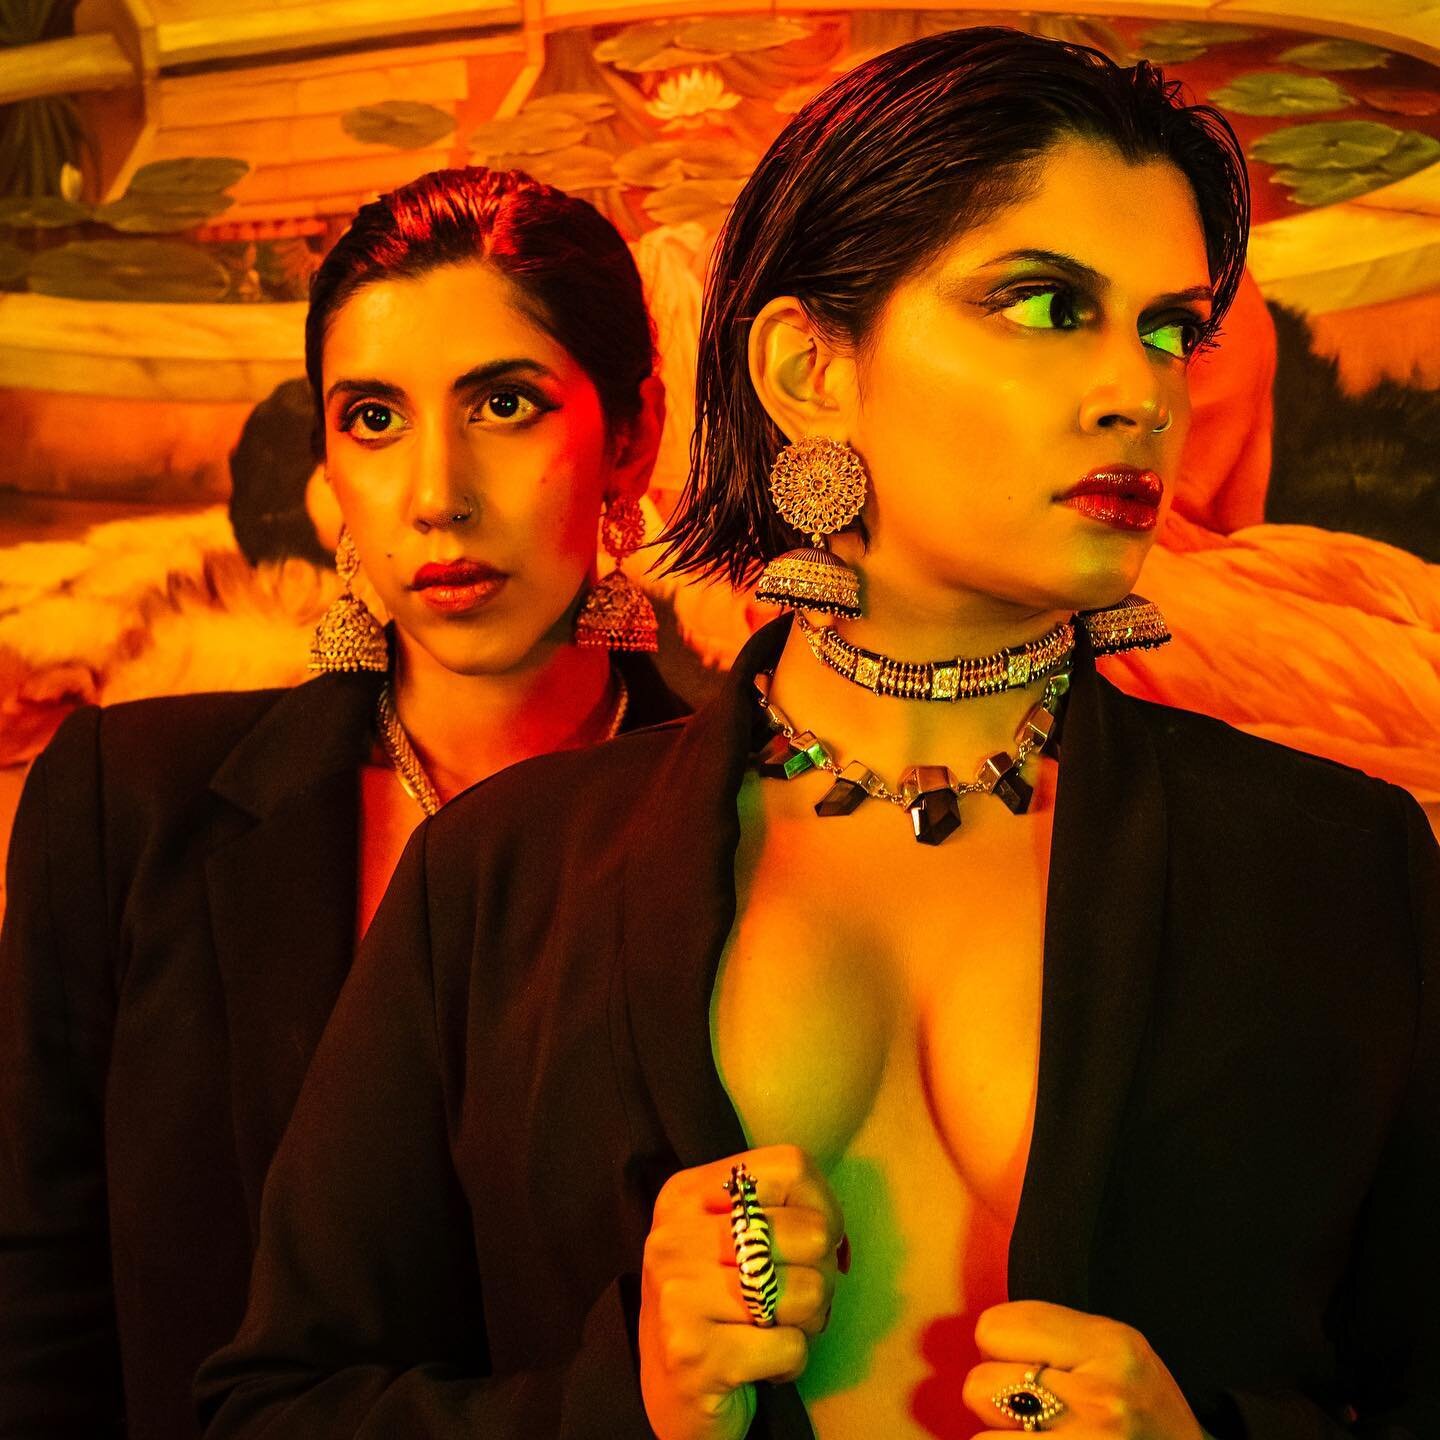 We are thrilled to have @cartel.madras closing the night in the Alma Duncan Theatre, on Dec. 10th at Pique winter edition! 🤩

Cartel Madras are a Canadian Experimental hip-hop duo comprised of sisters Eboshi and Contra. Born in Chennai in the Indian